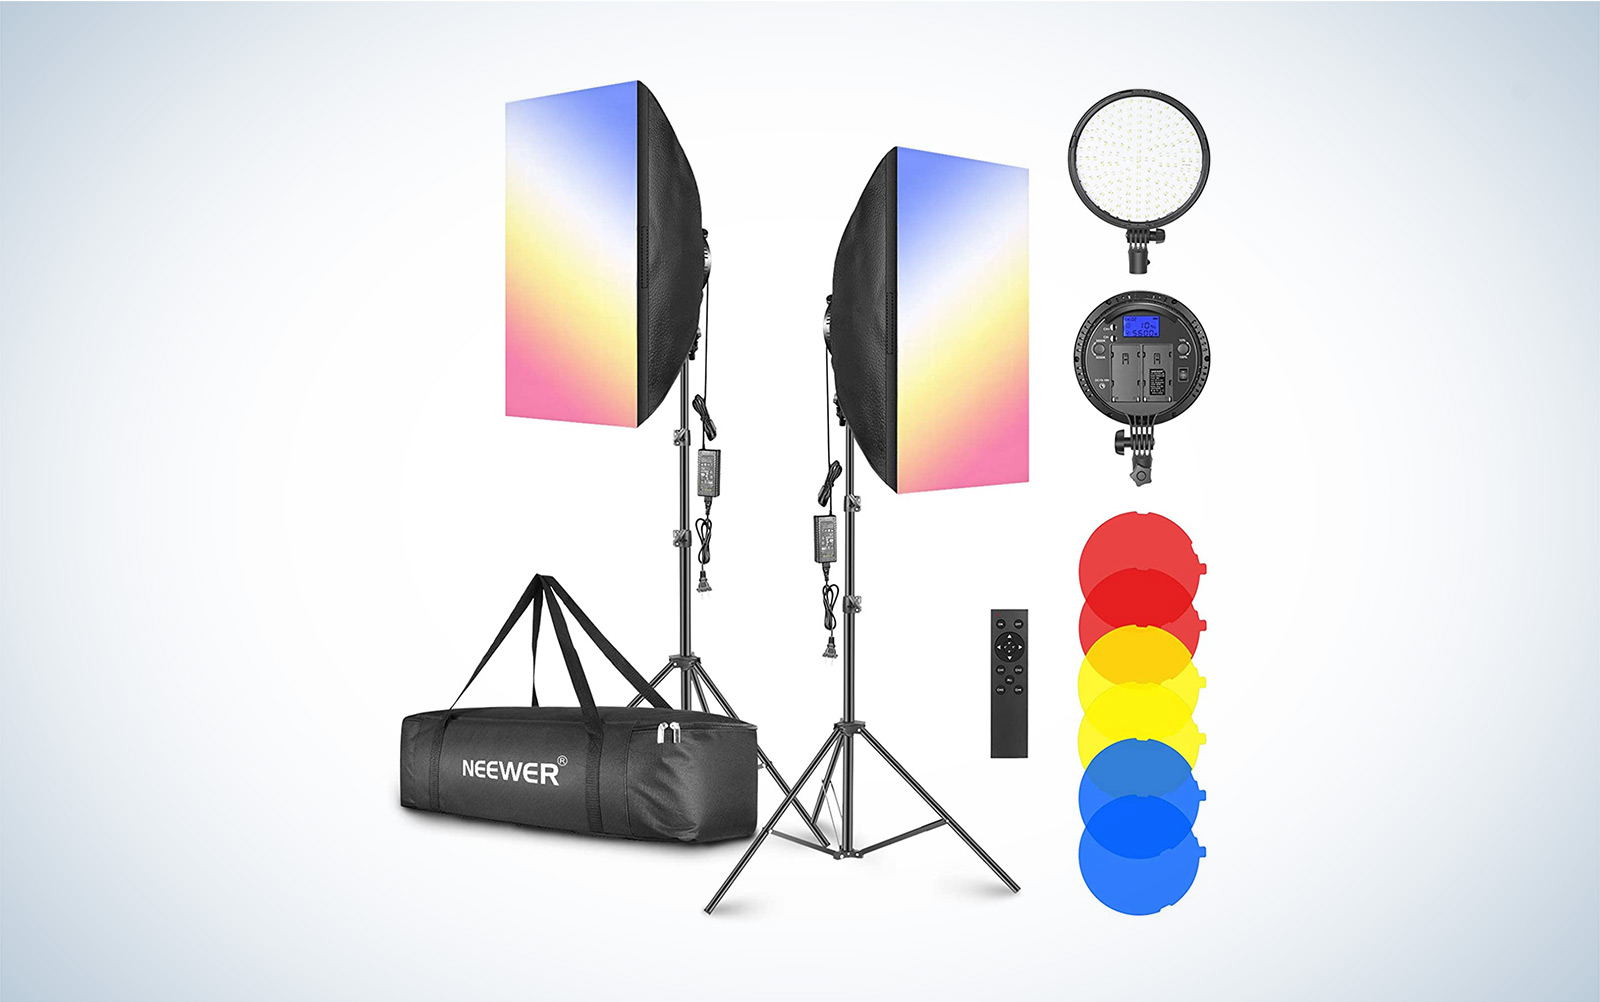 Neewer Advanced 2.4G 660 LED Video Softbox Light Kit - Gear Recommended by  Video Supply